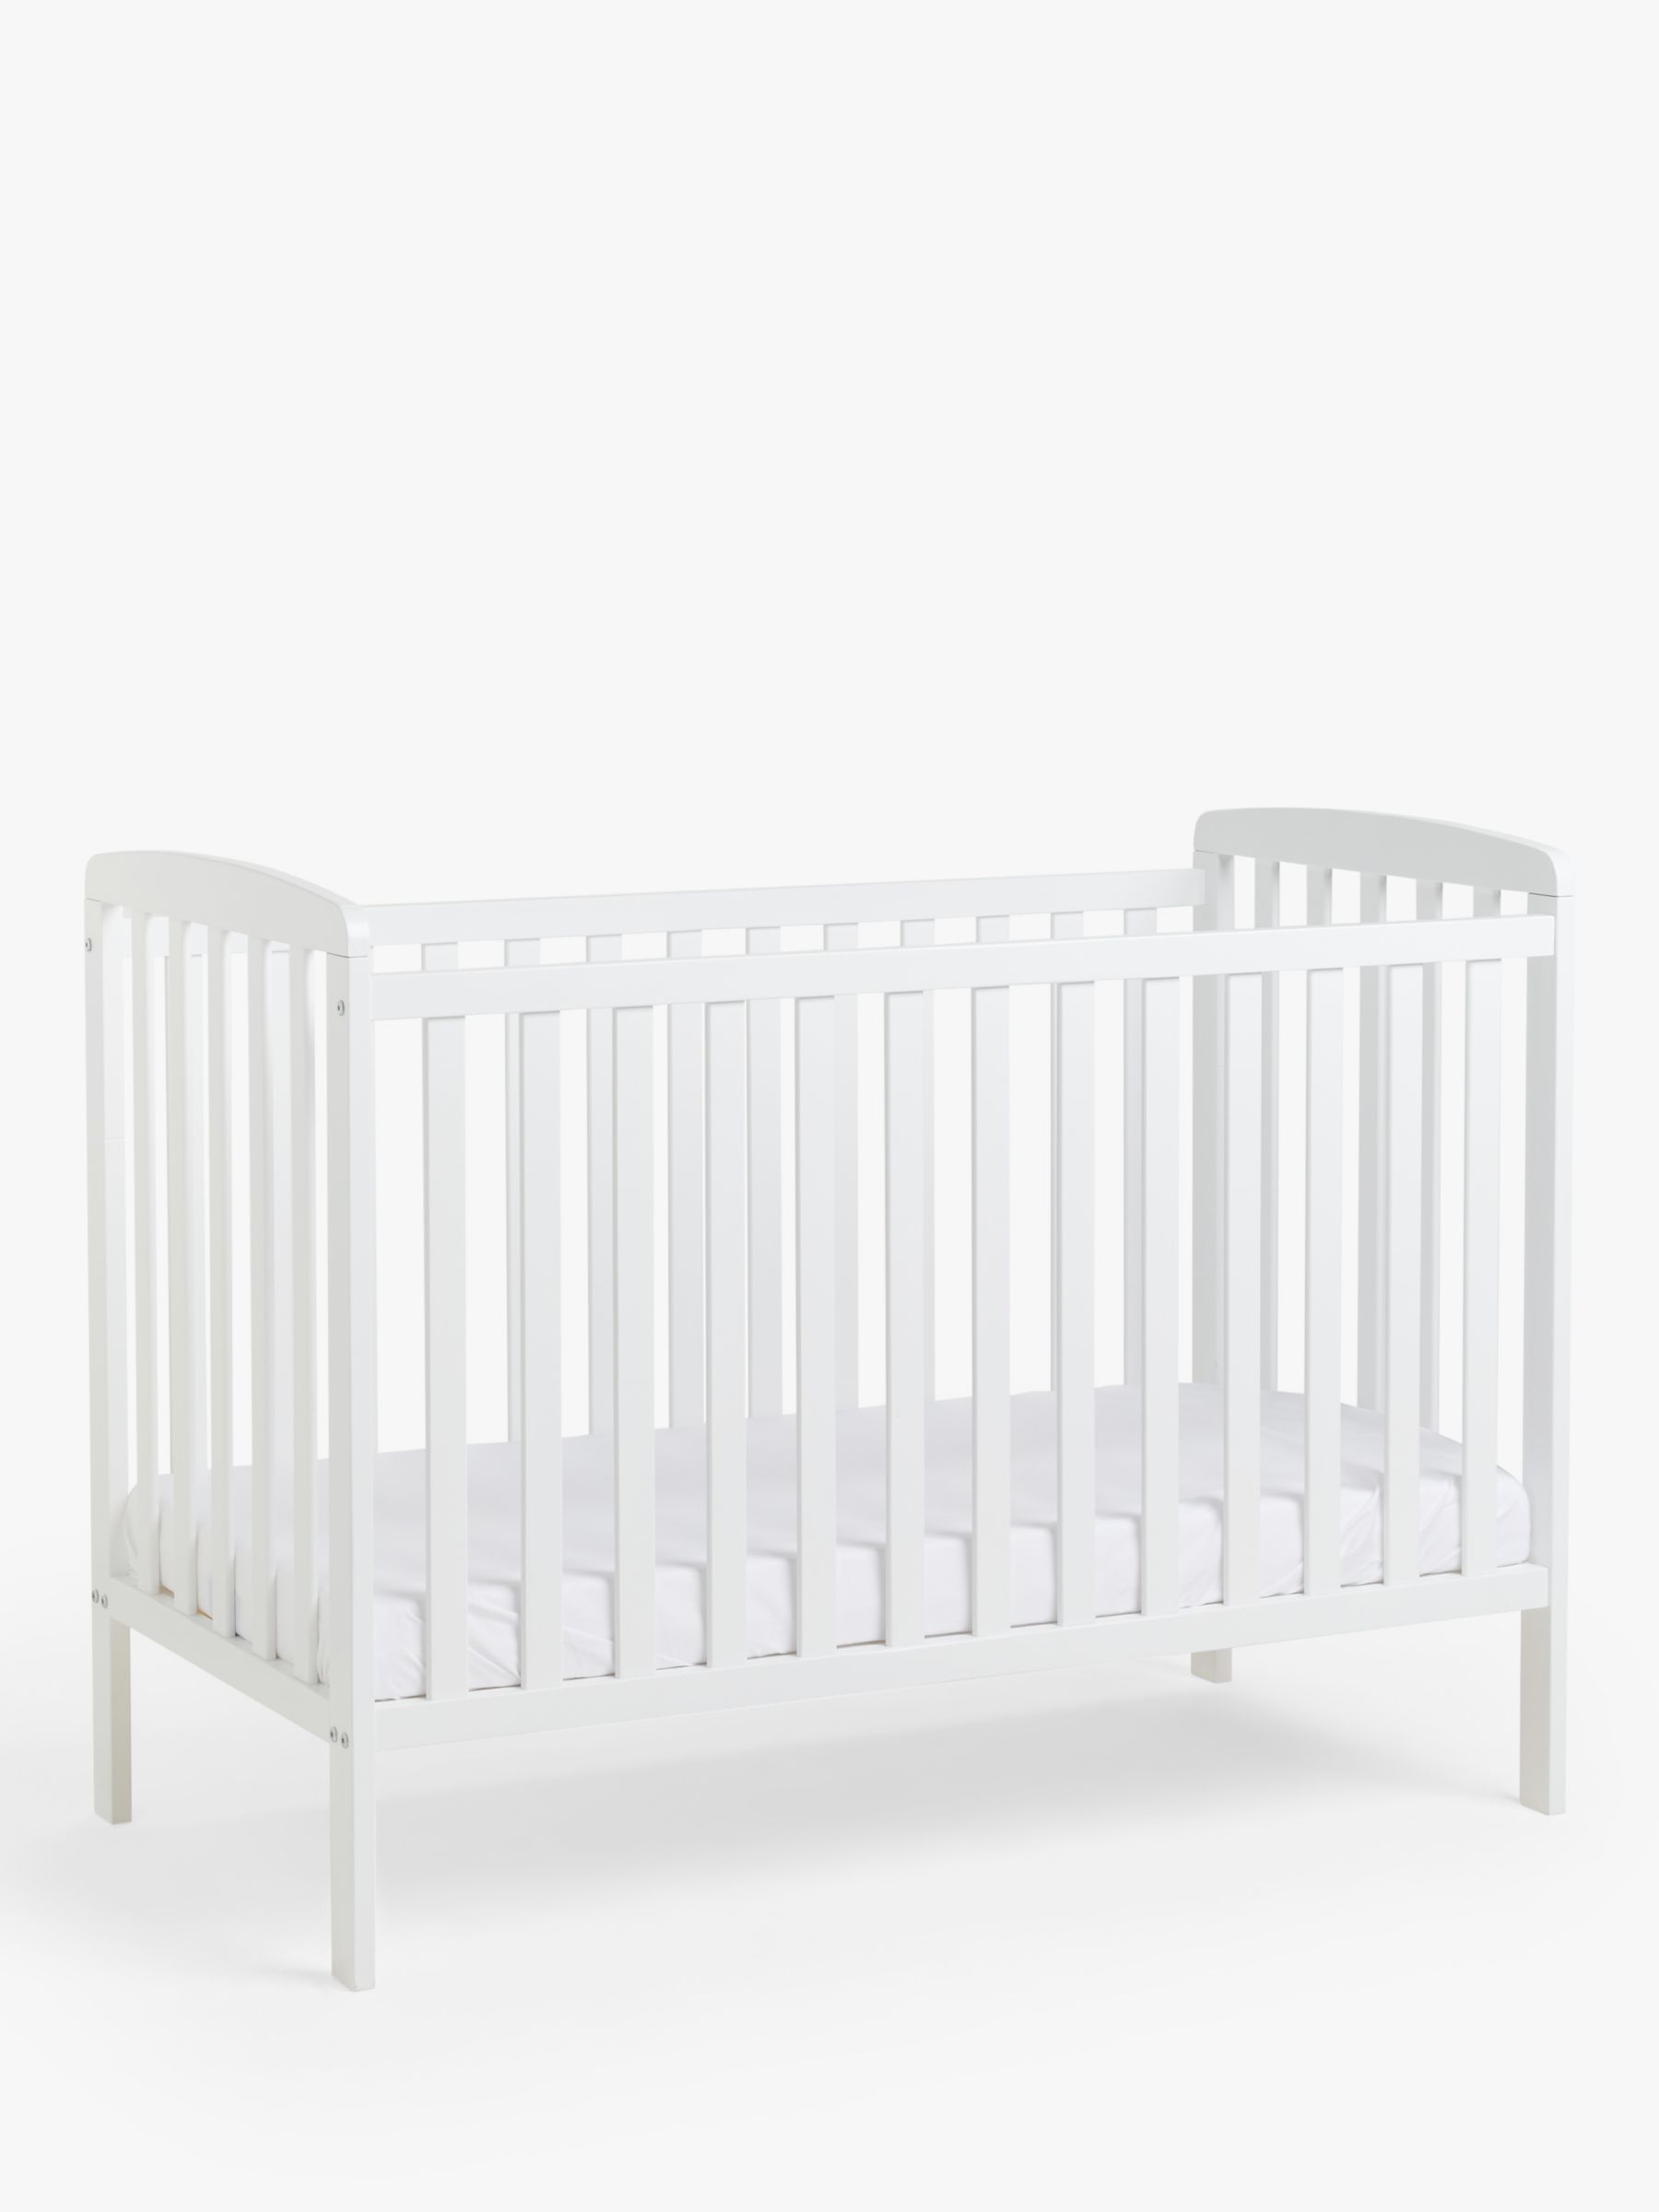 John Lewis ANYDAY Elementary Cot, White